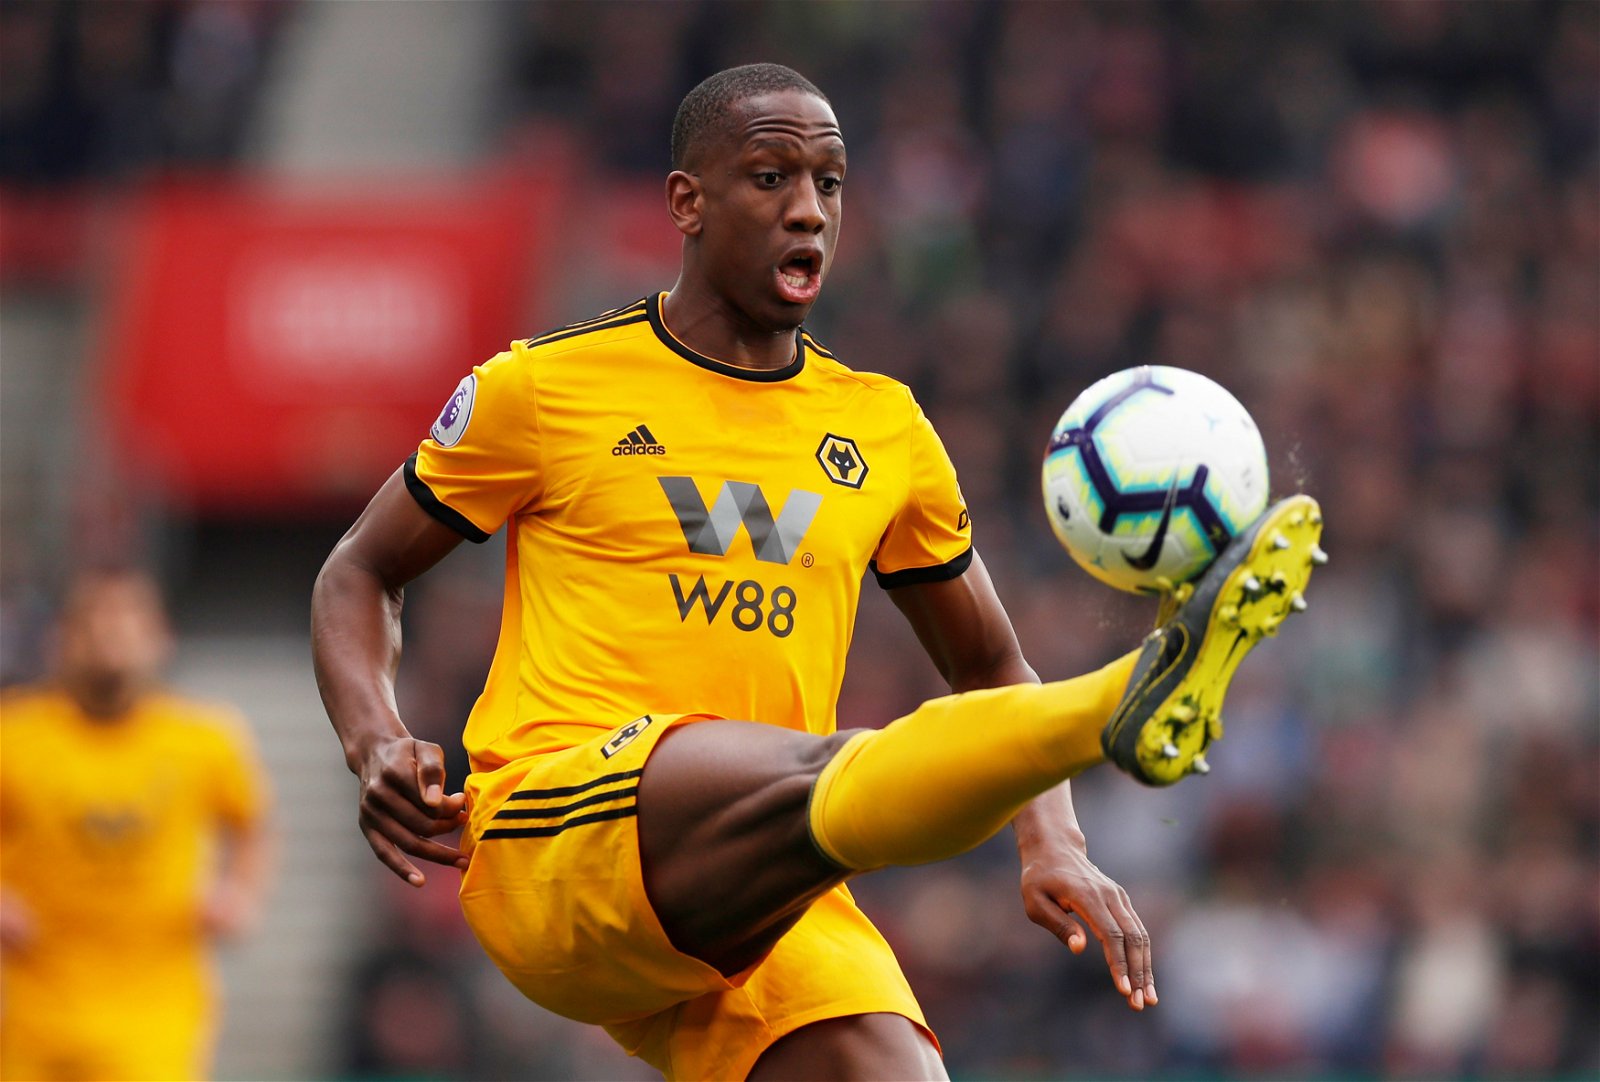 Season over for Wolverhampton defender Willy Boly after surgery on fractured fibula